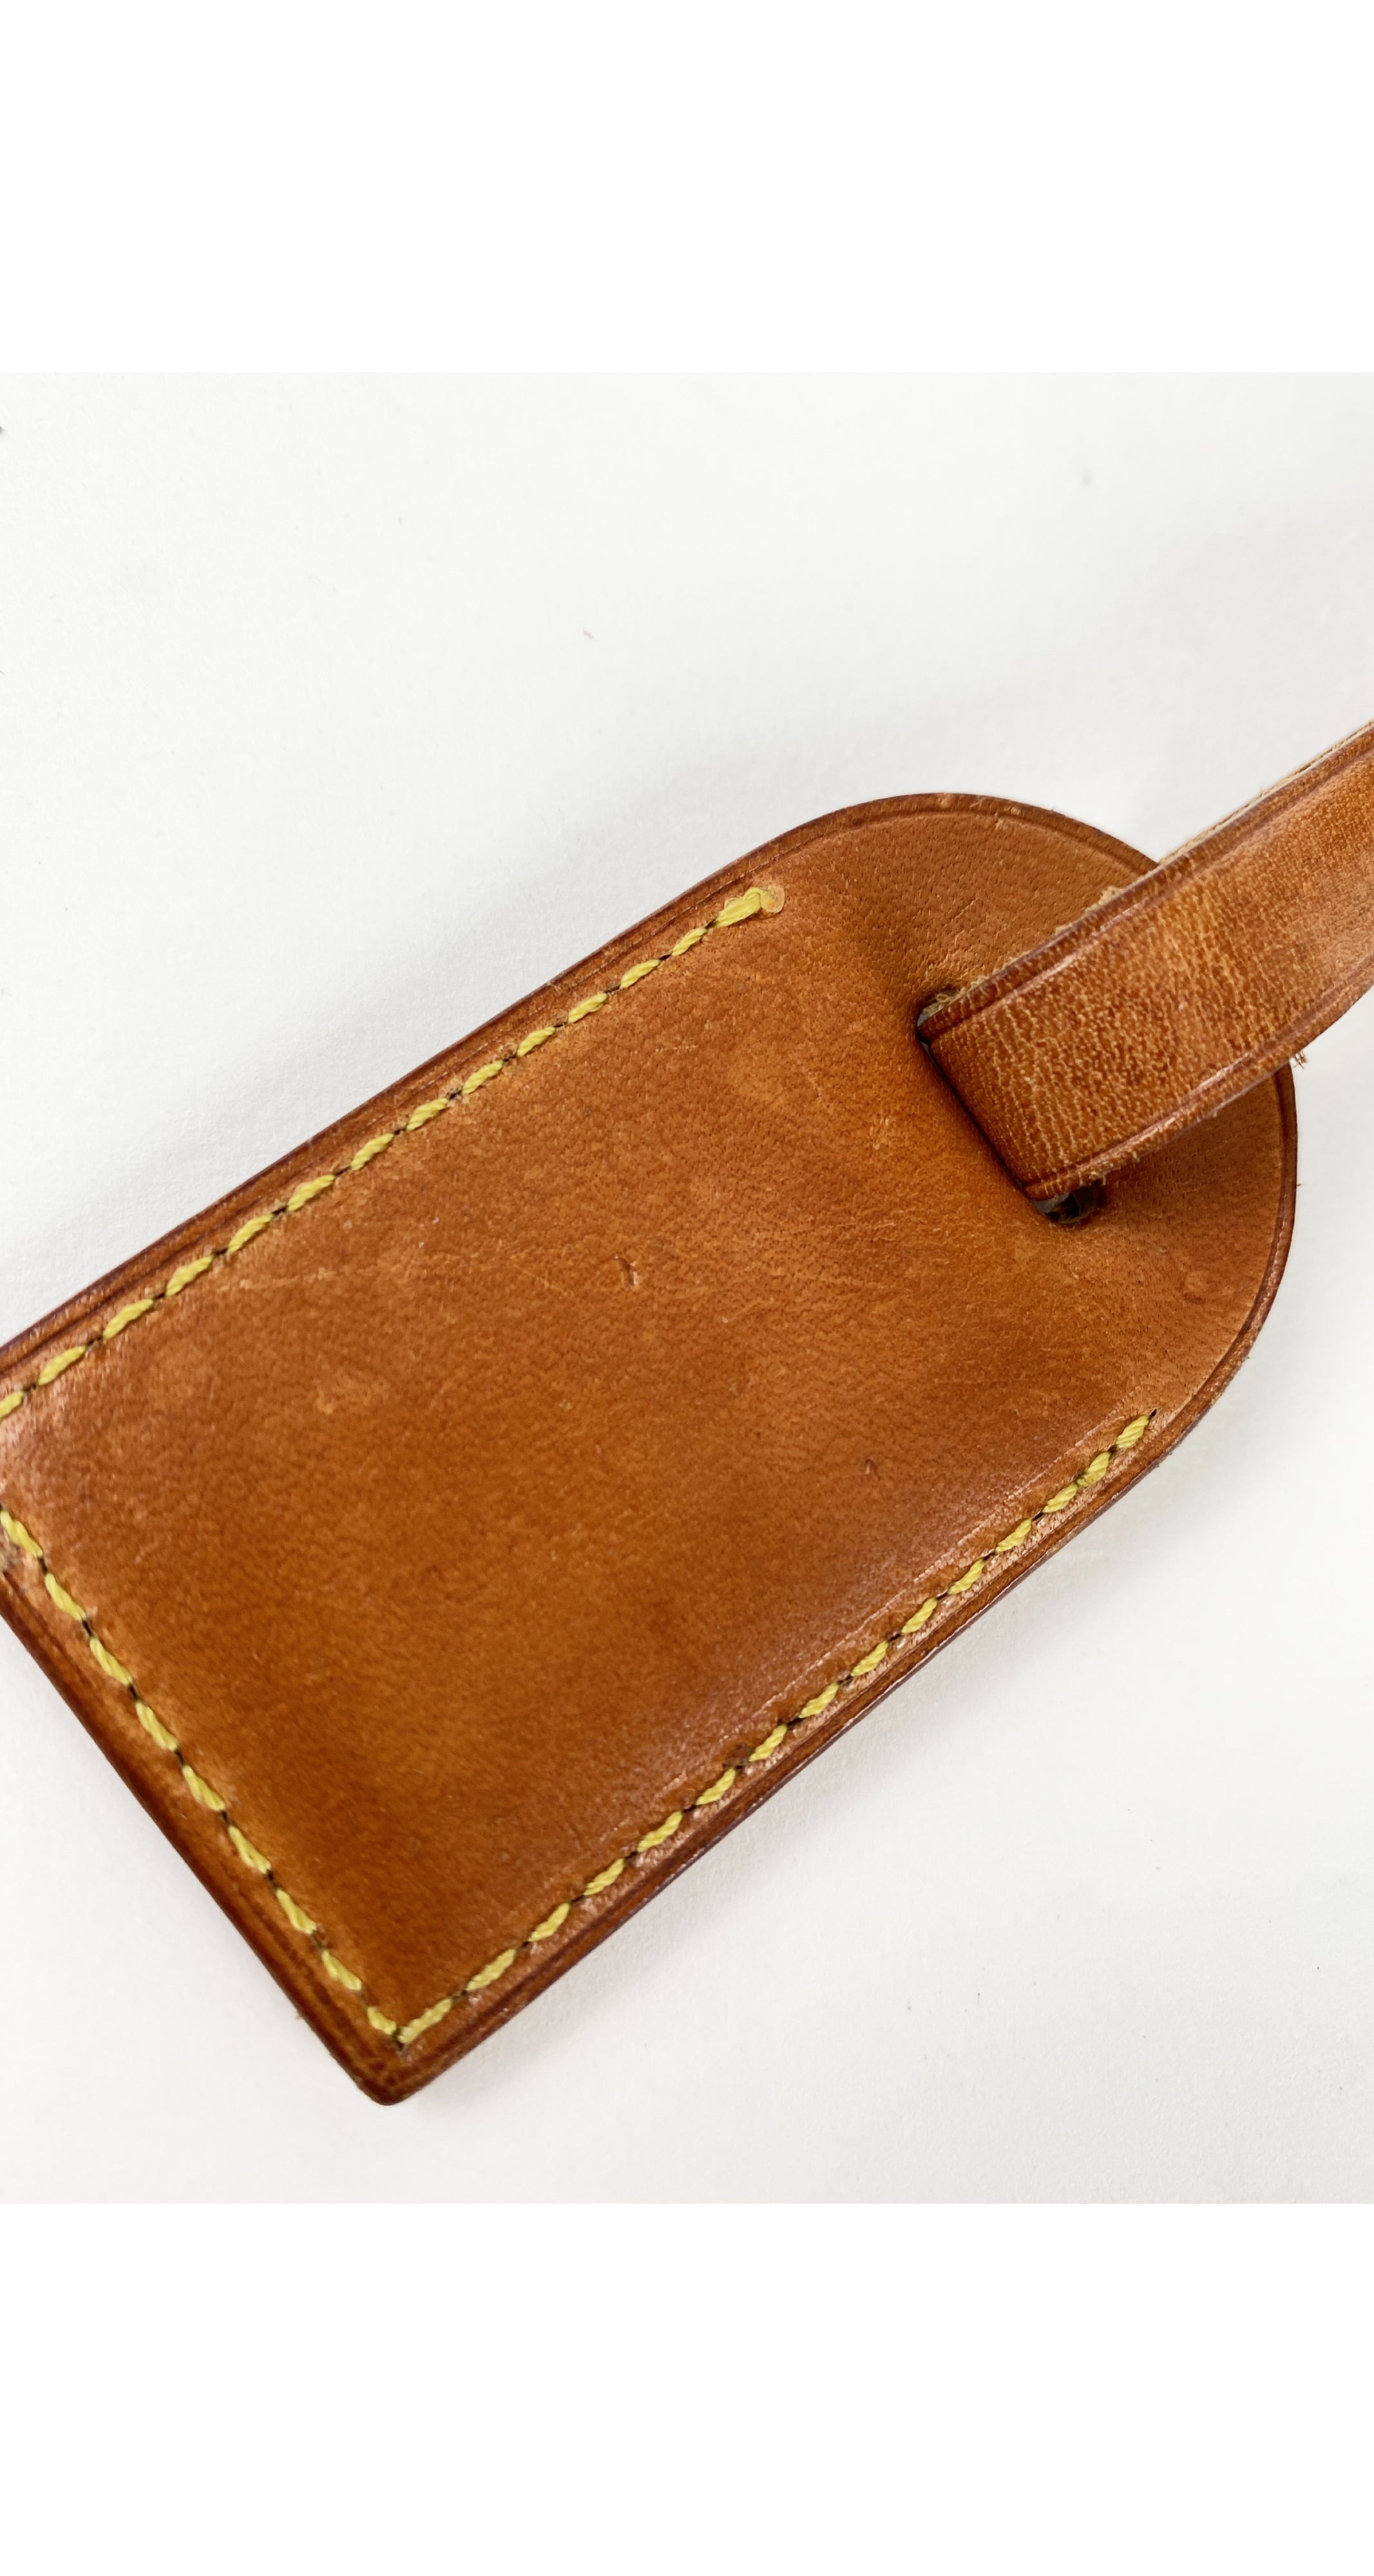 Louis Vuitton 1980s Vintage Brown Leather Luggage Tag